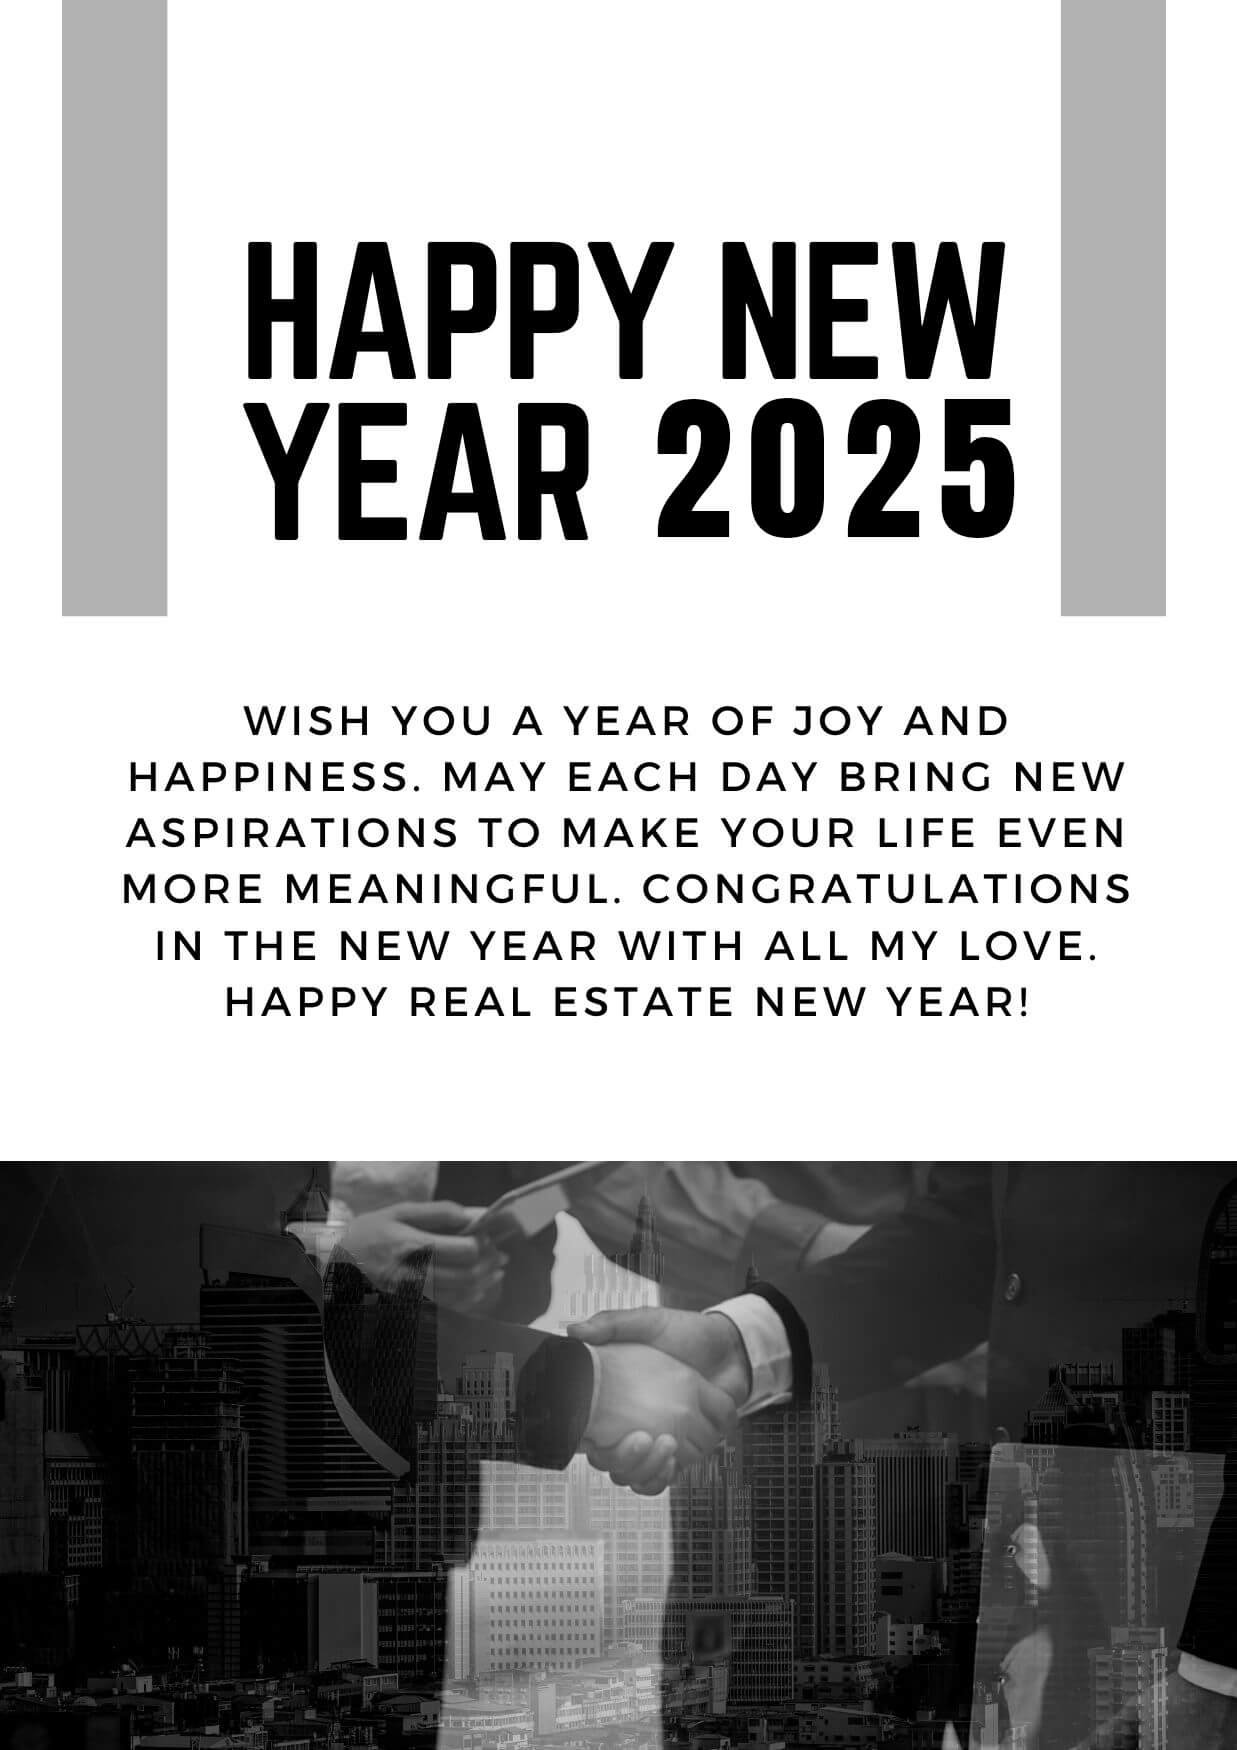 Happy New Year Quotes And Wishes For Real Estate 2025